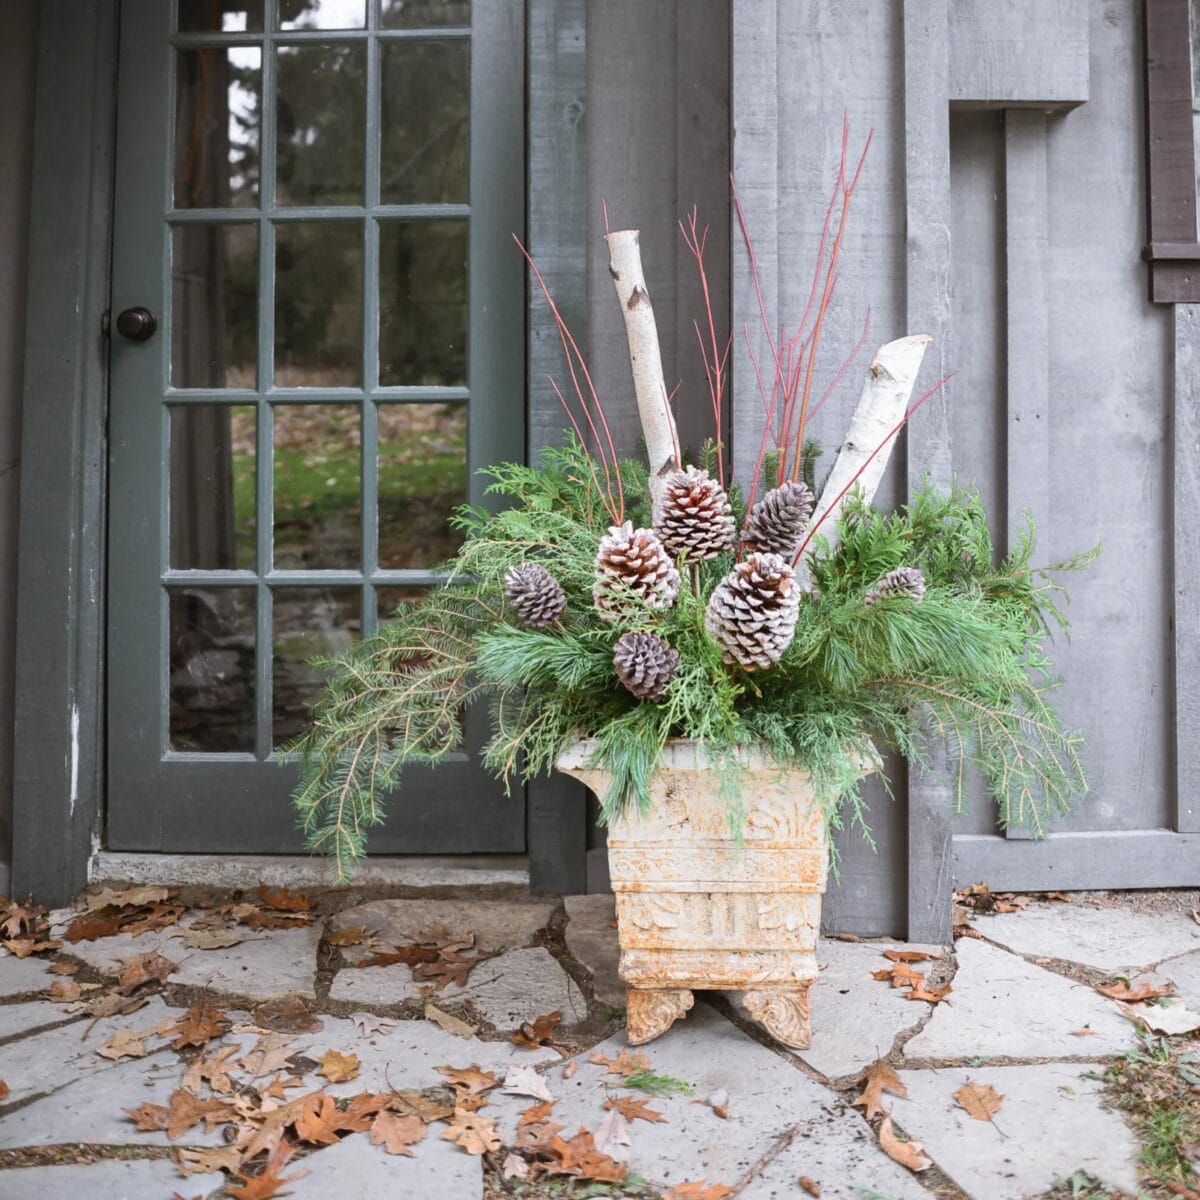 A festive floral planter with evergreen boughs, birch limbs, and pinecones.